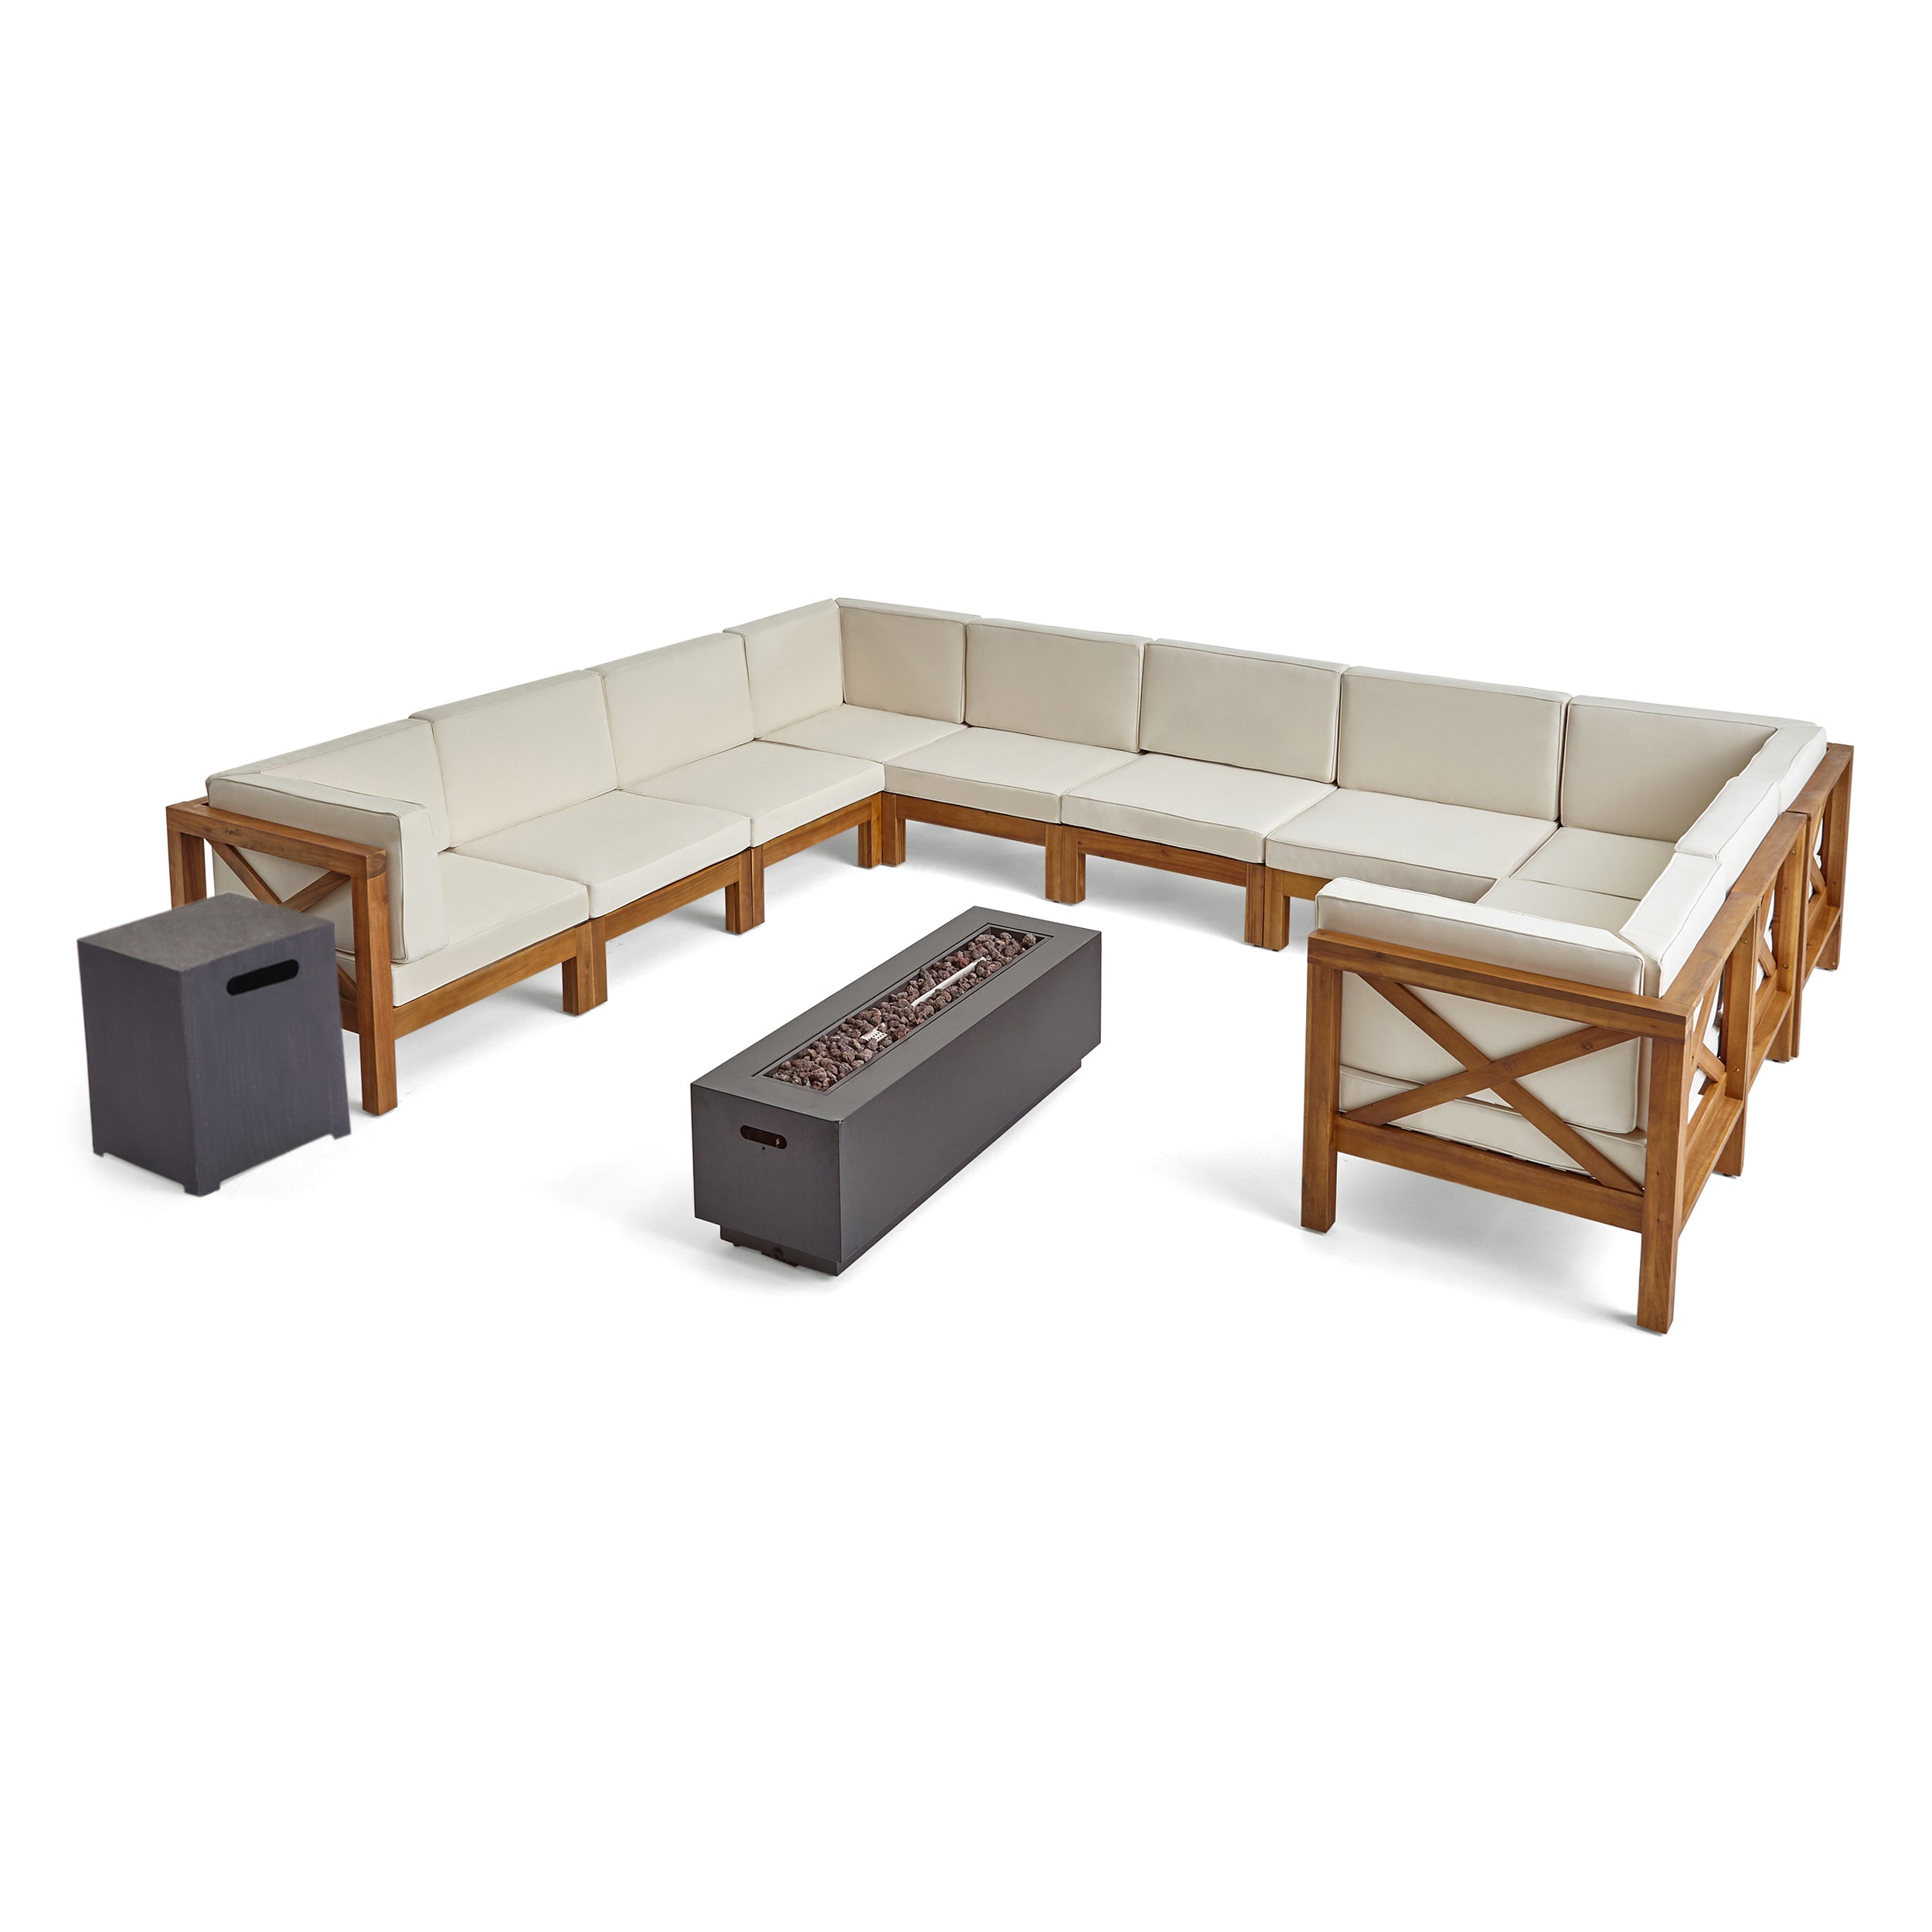 Lorelei Outdoor Acacia Wood 10 Seater U Shaped Sectional Sofa Set with Fire Pit Weathered Gray Dark Gray